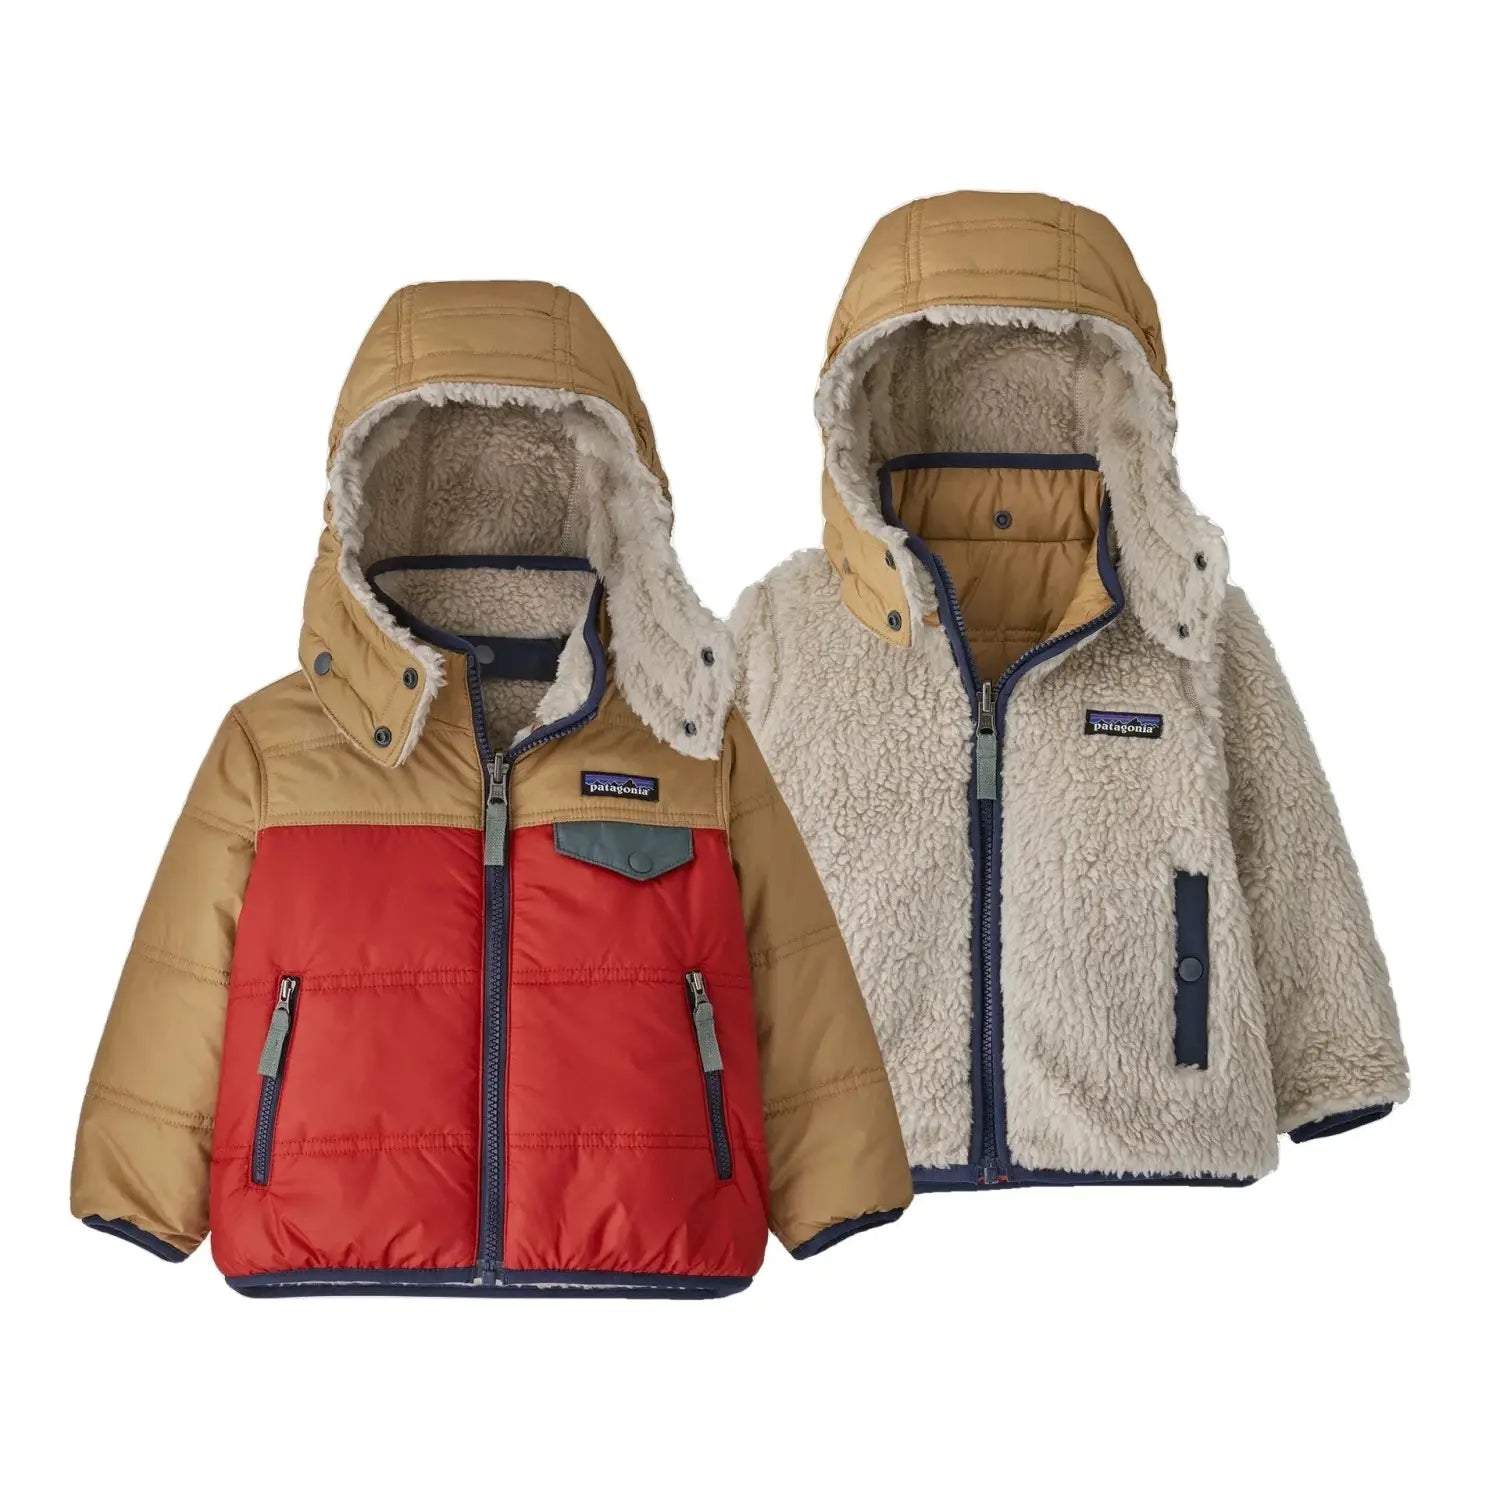 Patagonia Baby Reversible Tribbles Hoody shown in Touring Red color option. Tan arms, shoulders and hood. Red chest with navy trim. Reversed also shown with cream fleece.